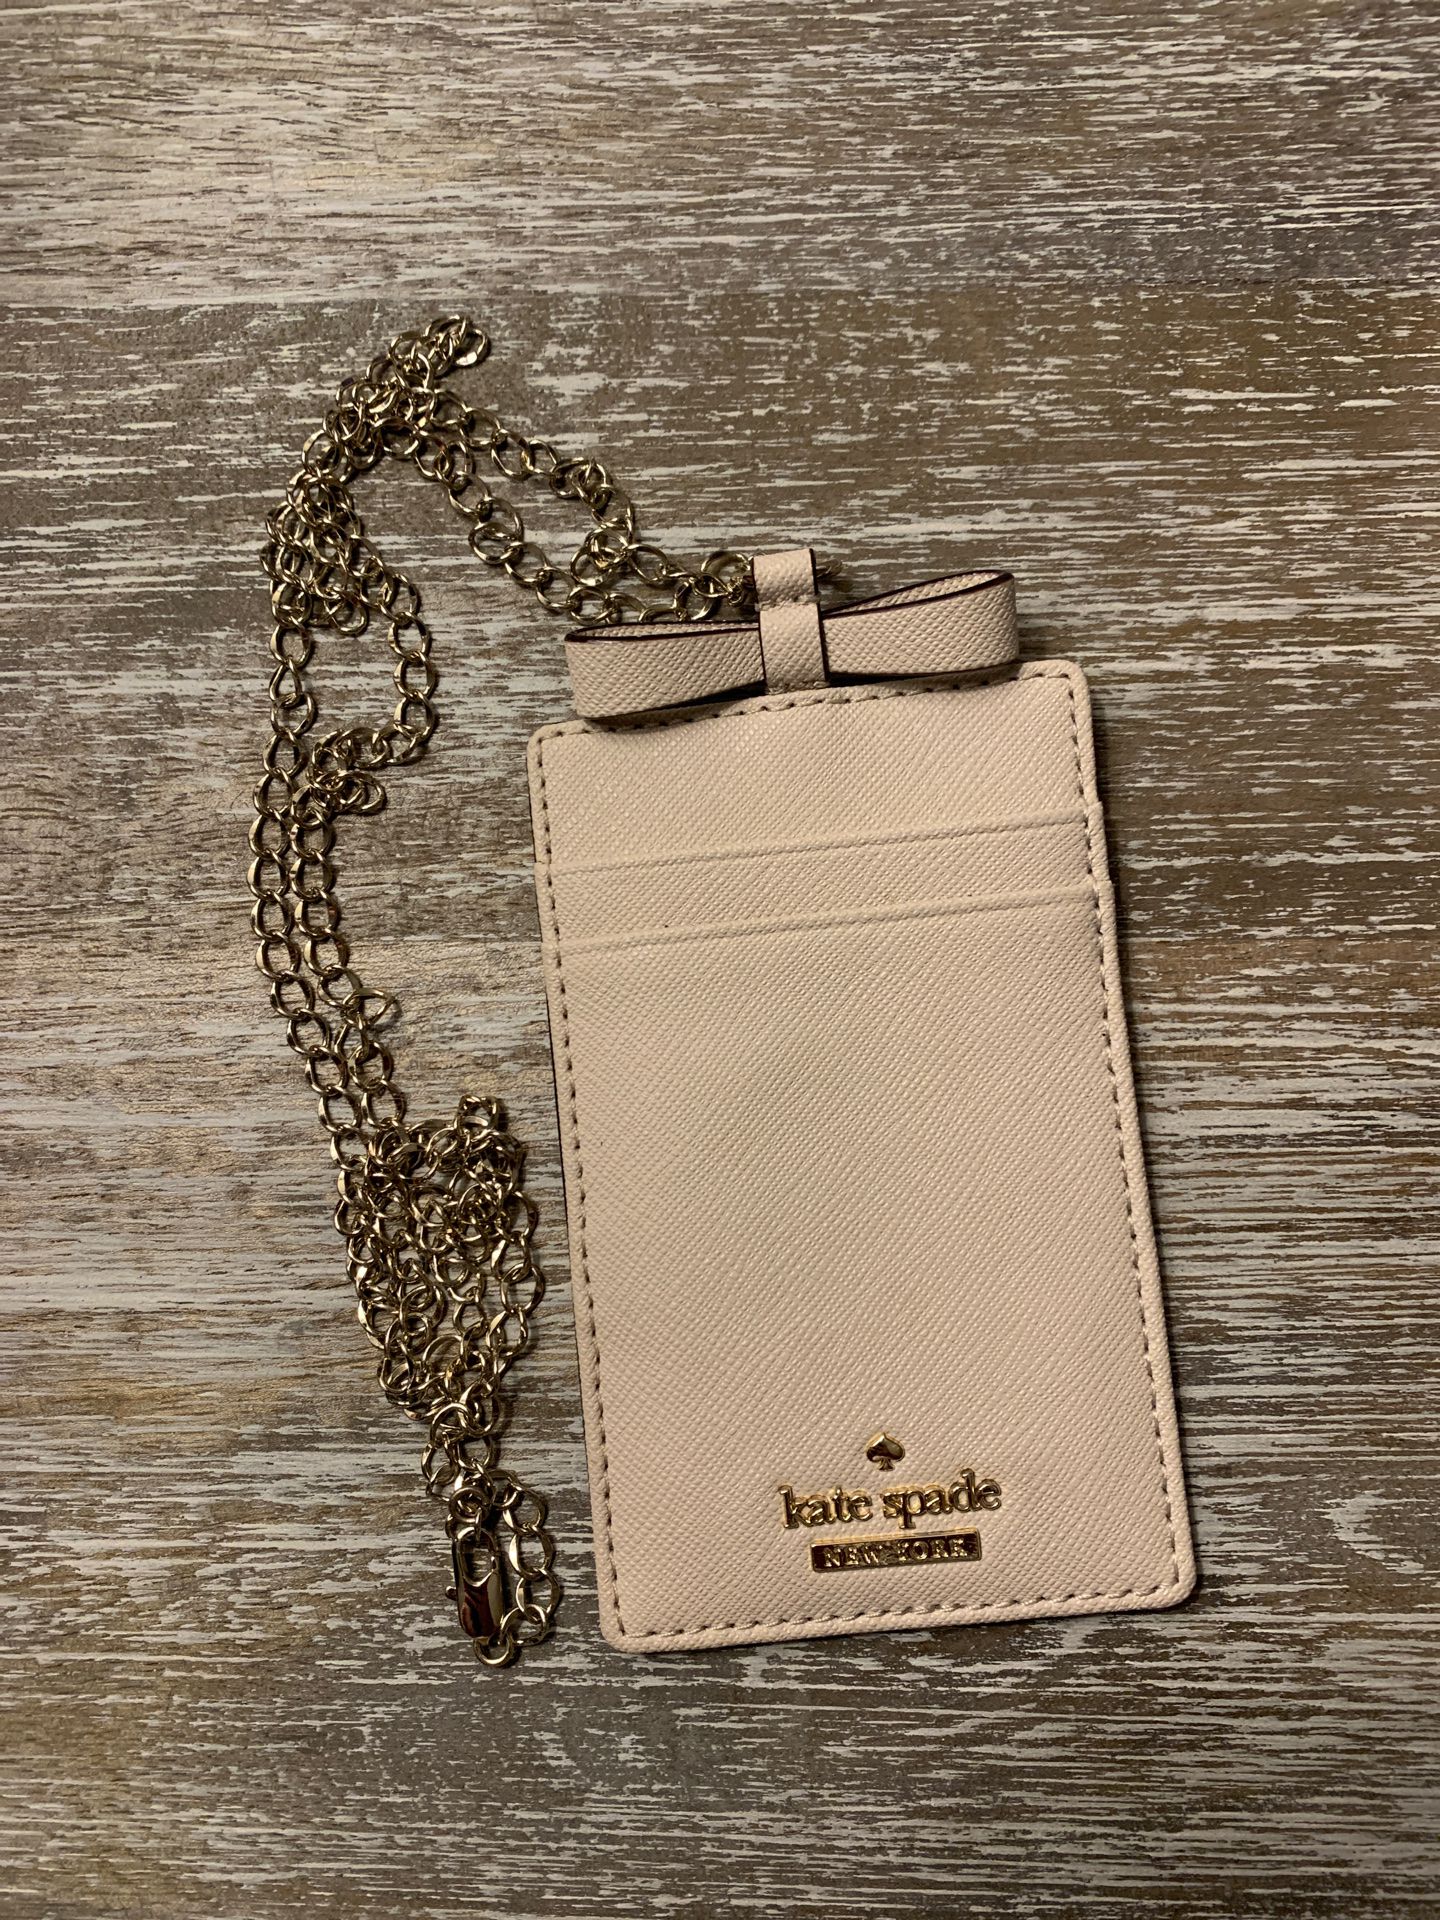 Kate Spade ID and Card holder with gold necklace.